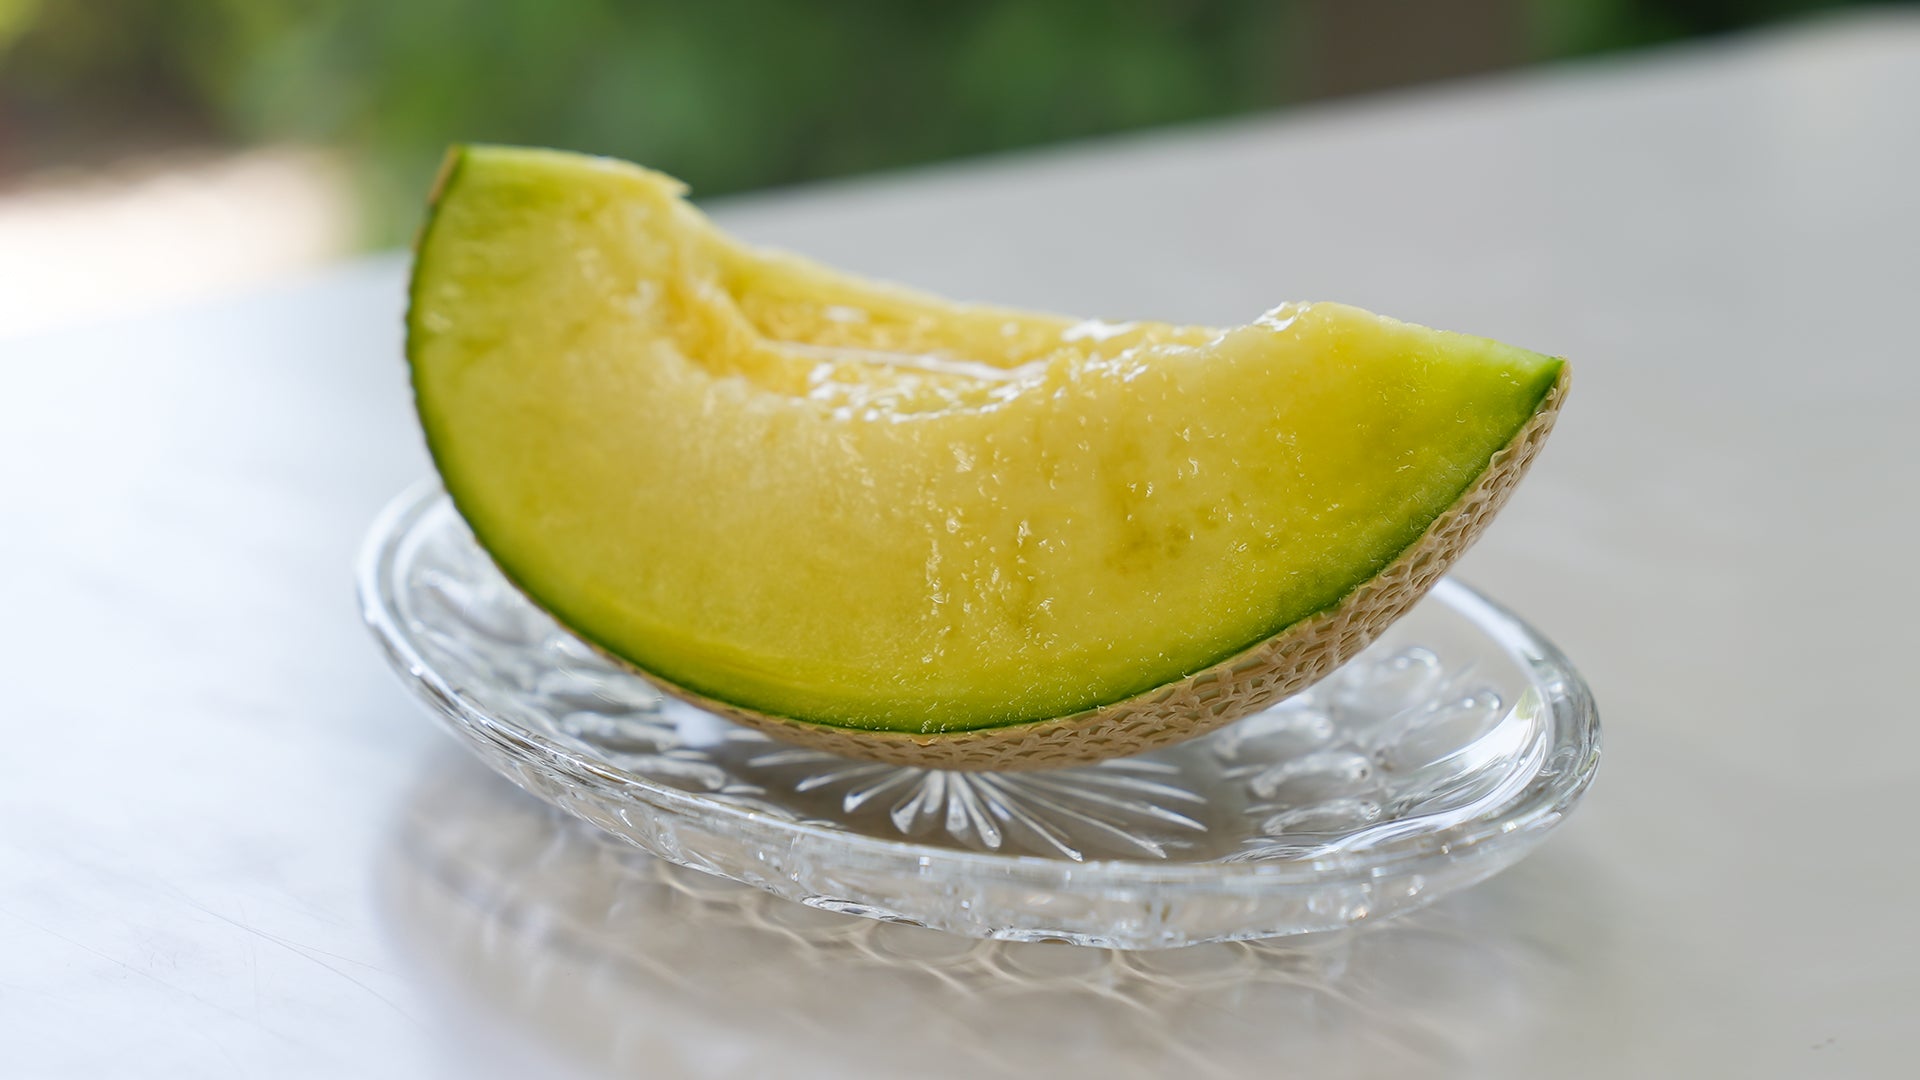 A slice of Crown Melon - the Crown Jewel of Luxury Fruits